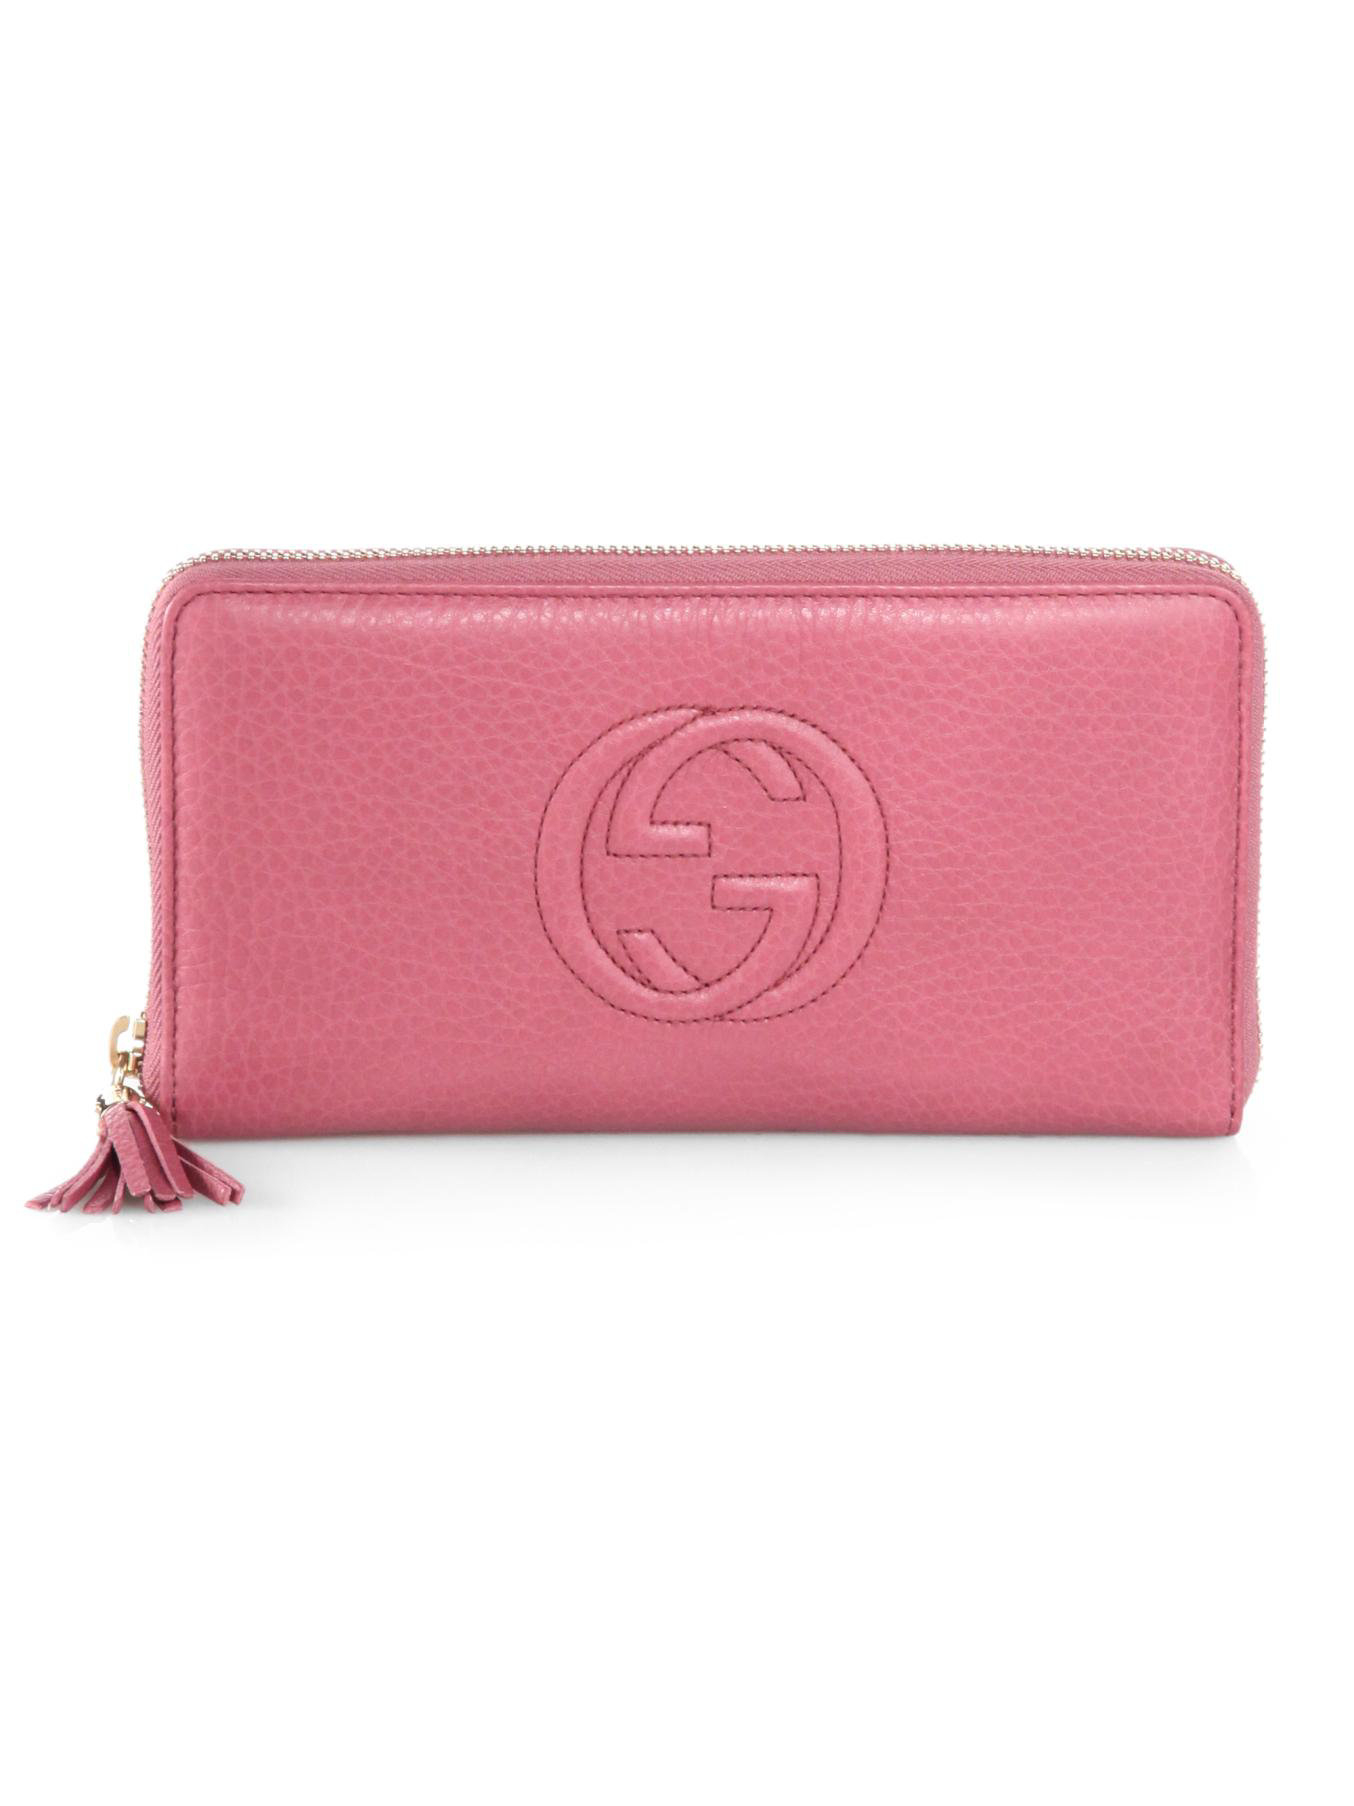 Gucci Soho Leather 16-Slot Zip-Around Wallet in Pink - Lyst